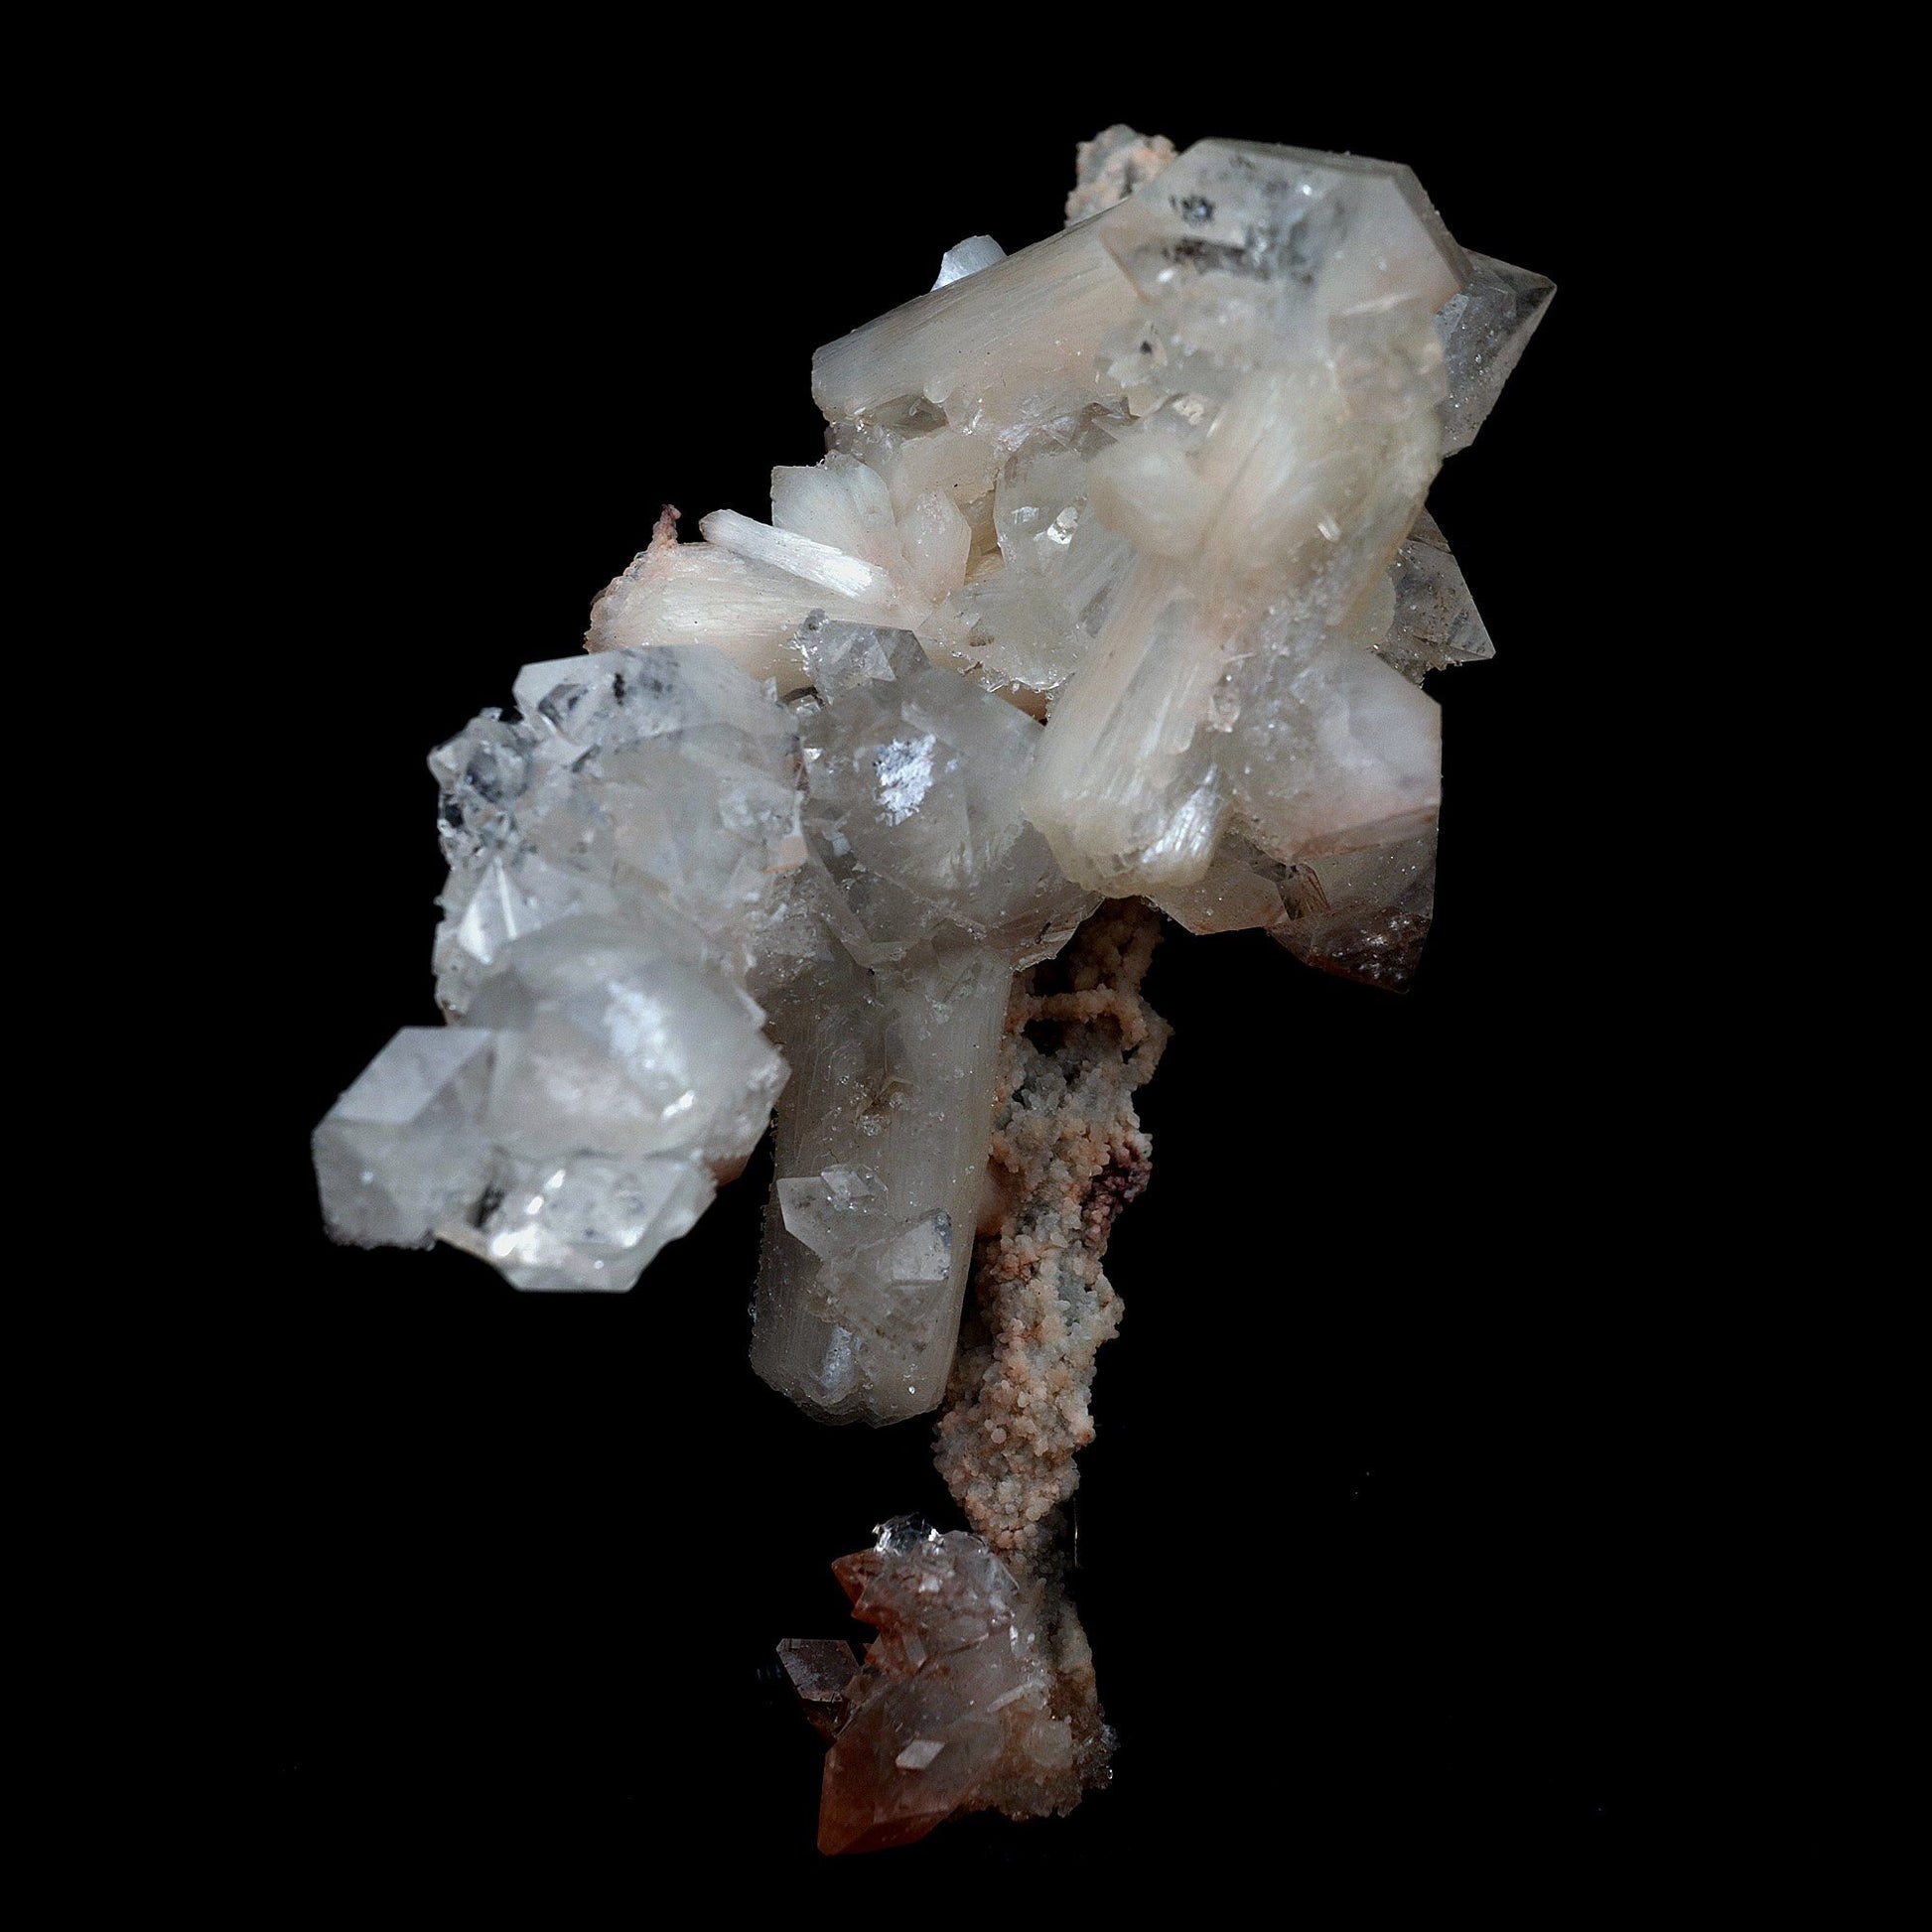 Pointed Apophyllite with Stilbite On Chalcedony Stalactite # B 4179  https://www.superbminerals.us/products/pointed-apophyllite-with-stilbite-on-chalcedony-stalactite-b-4179  Features:Very fine classic Apophyllite specimen with Stilbite on Quartz from the Jalgaon area Deccan Trap flood Basalts. Sharply formed crystals of Apophyllite, displaying strong development of prism and pyramidal faces. Crystals of Apophyllite have pleasing color less gemmy pyramidal areas due to hematite inclusions 